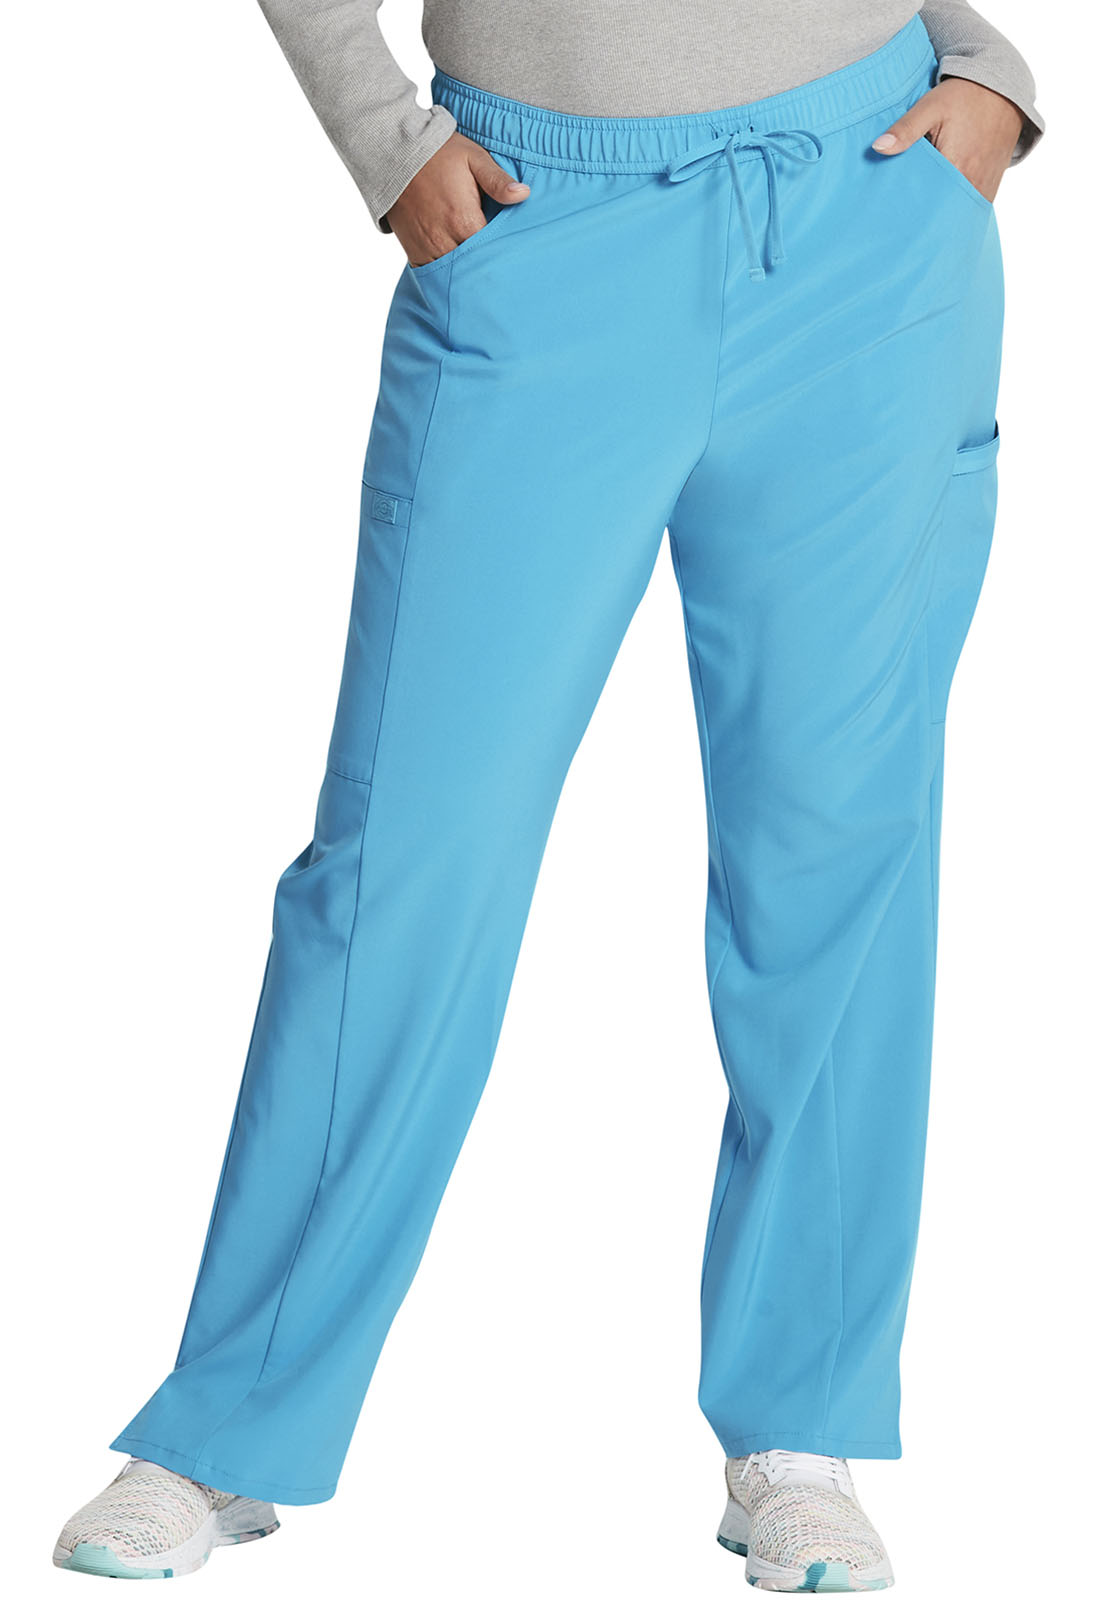 Dickies Mid Rise Straight Leg Drawstring Pant in Blue Hawaii CLEAROUT!